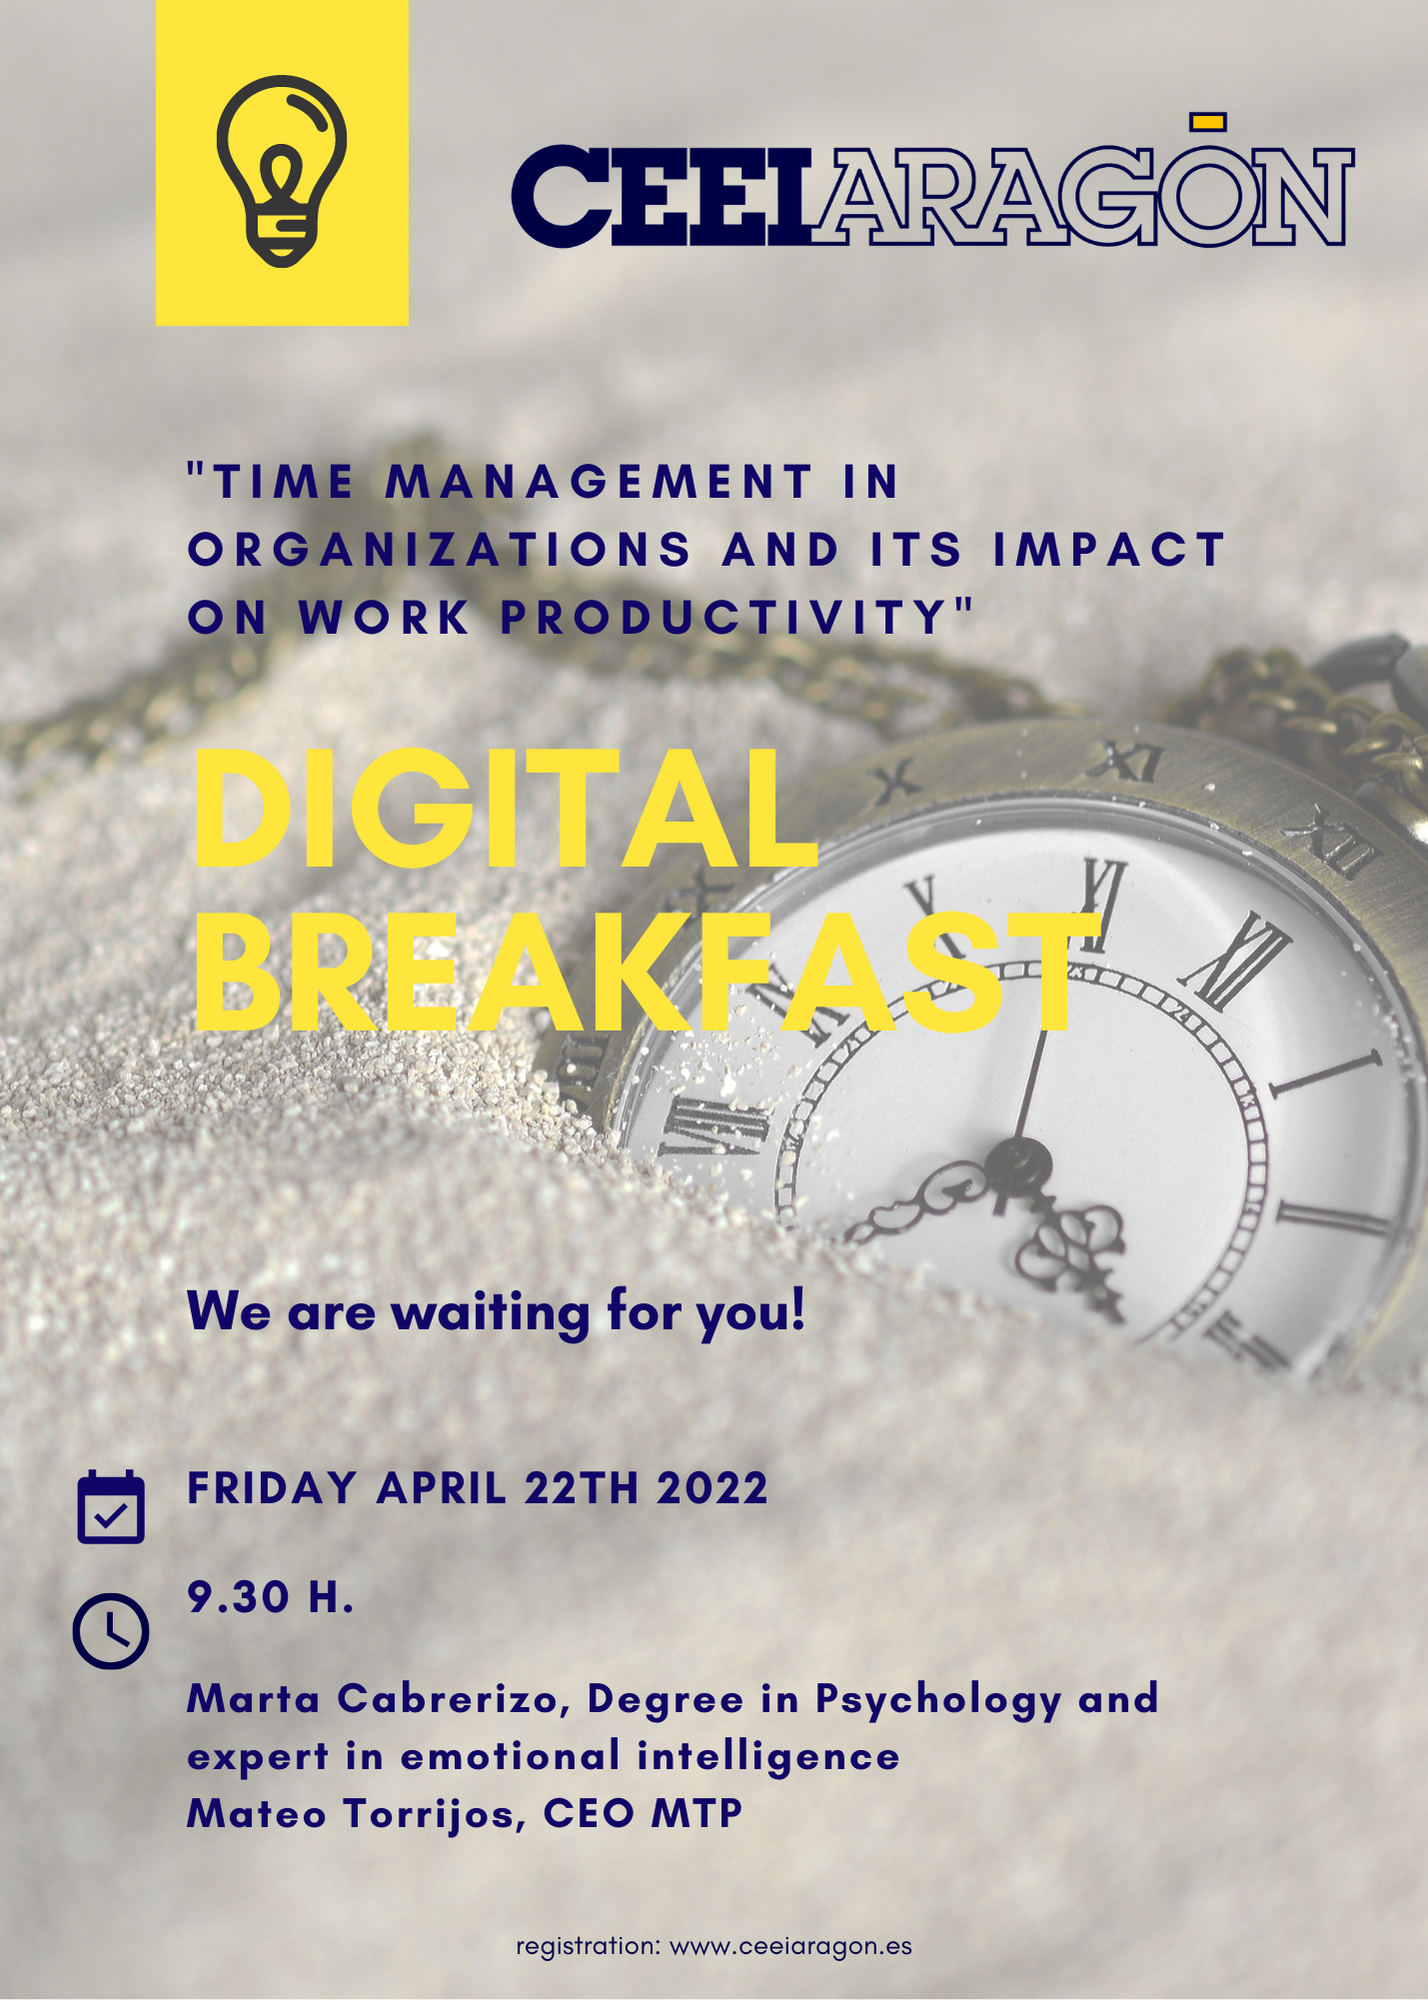 CEEIARAGON Digital Breakfast “Time management in organizations and its impact on work productivity”